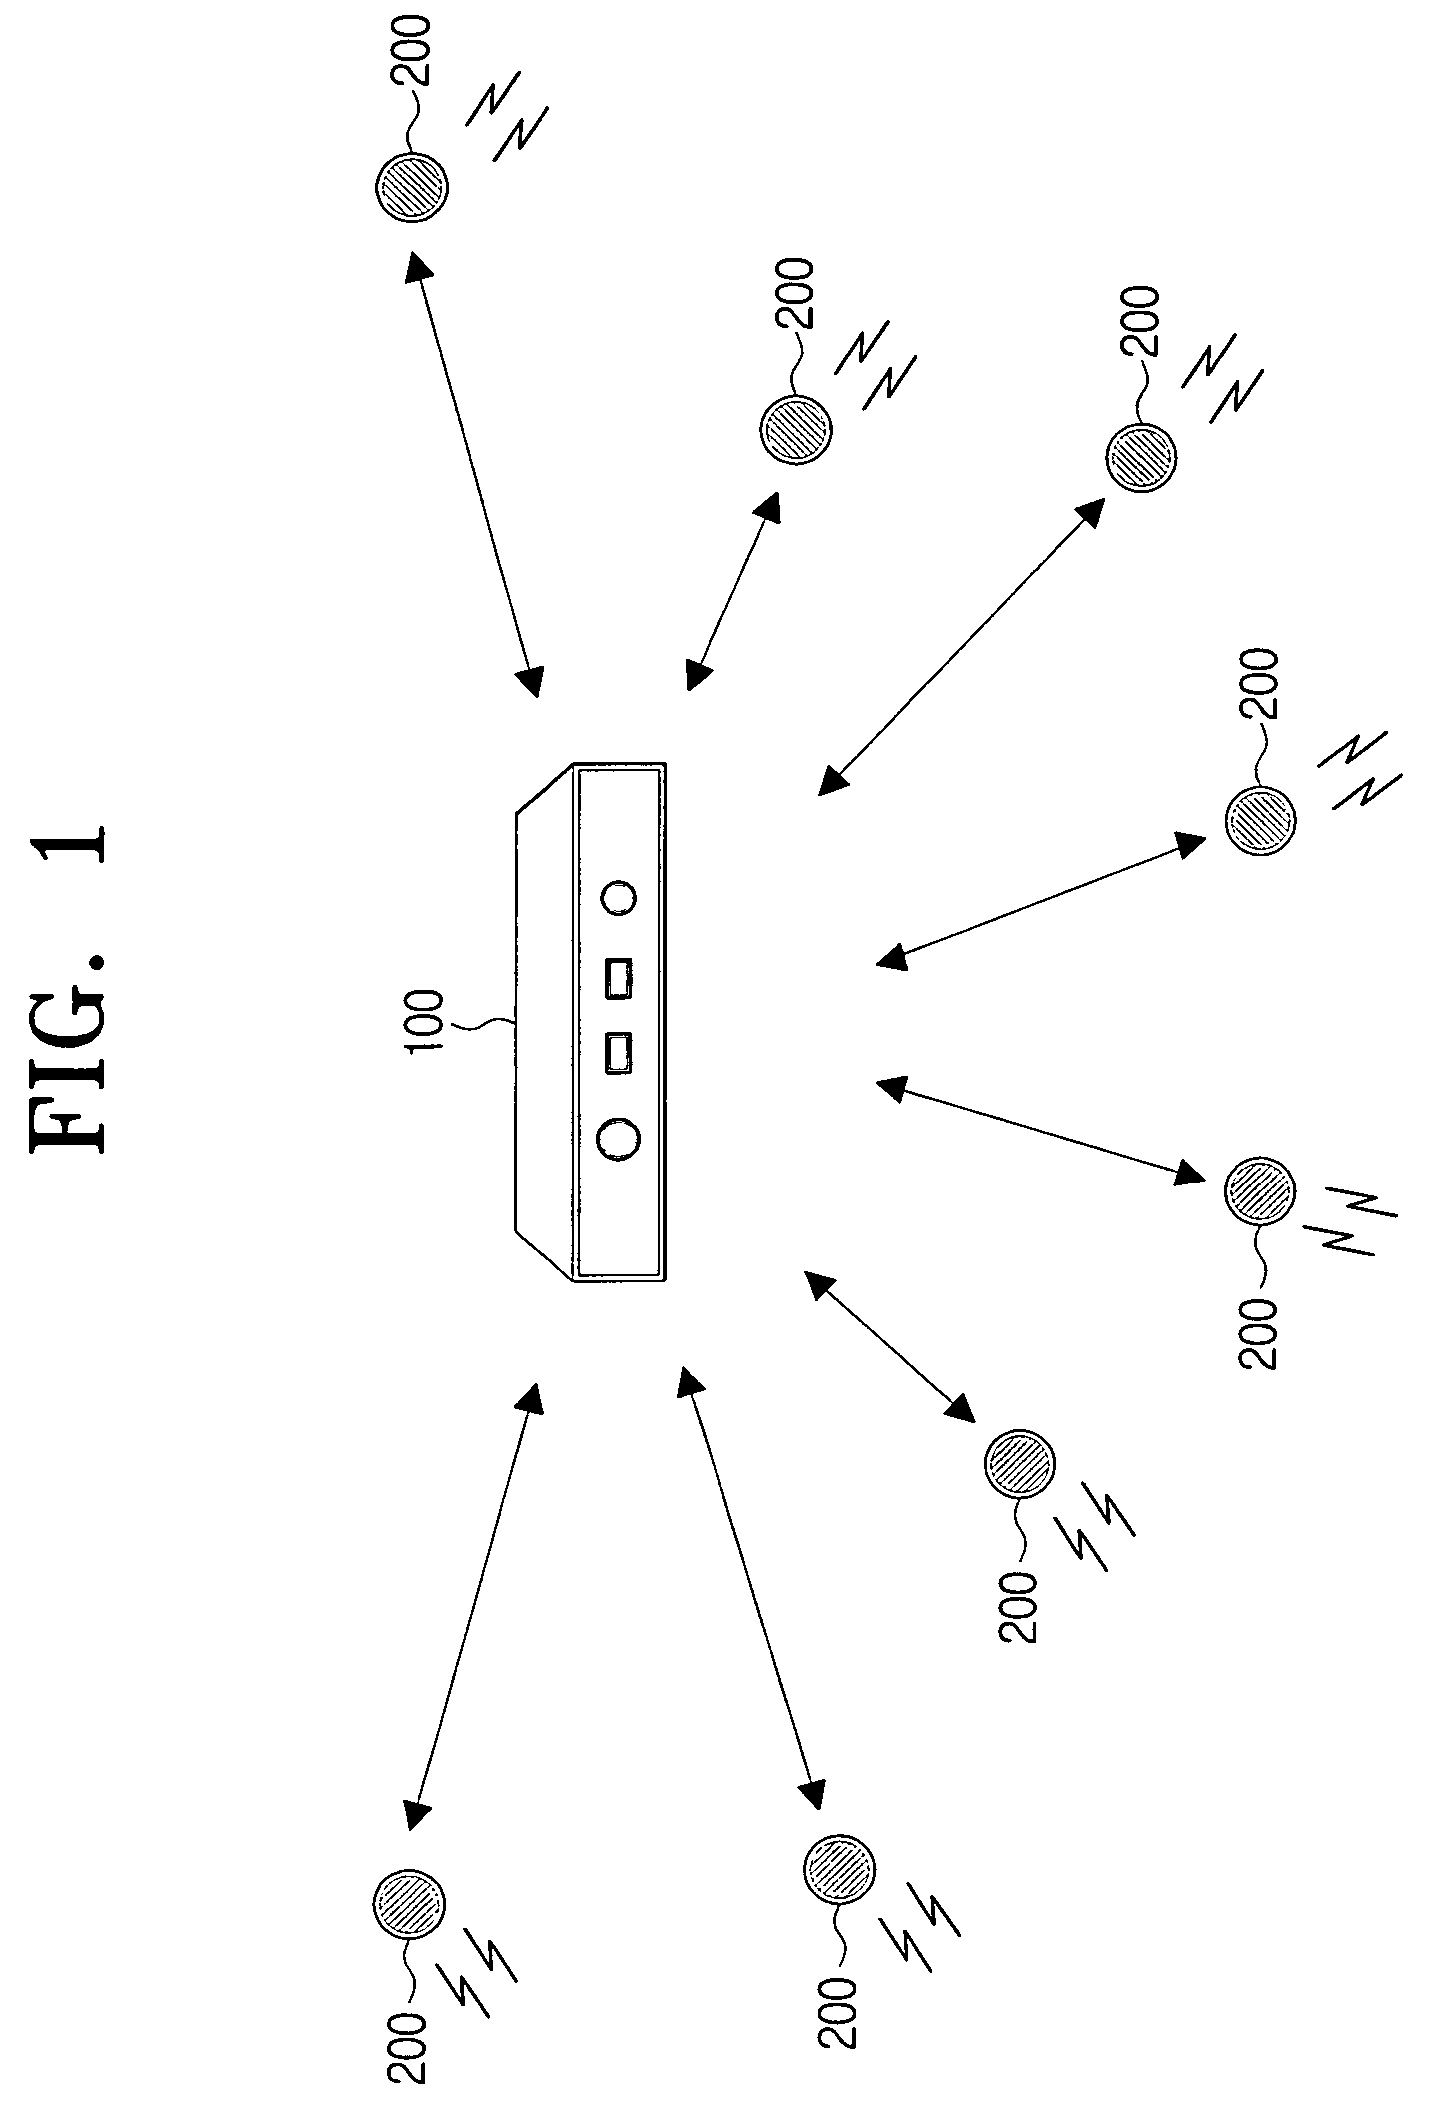 System and method for saving power consumption of sensor based on context information in wireless sensor network